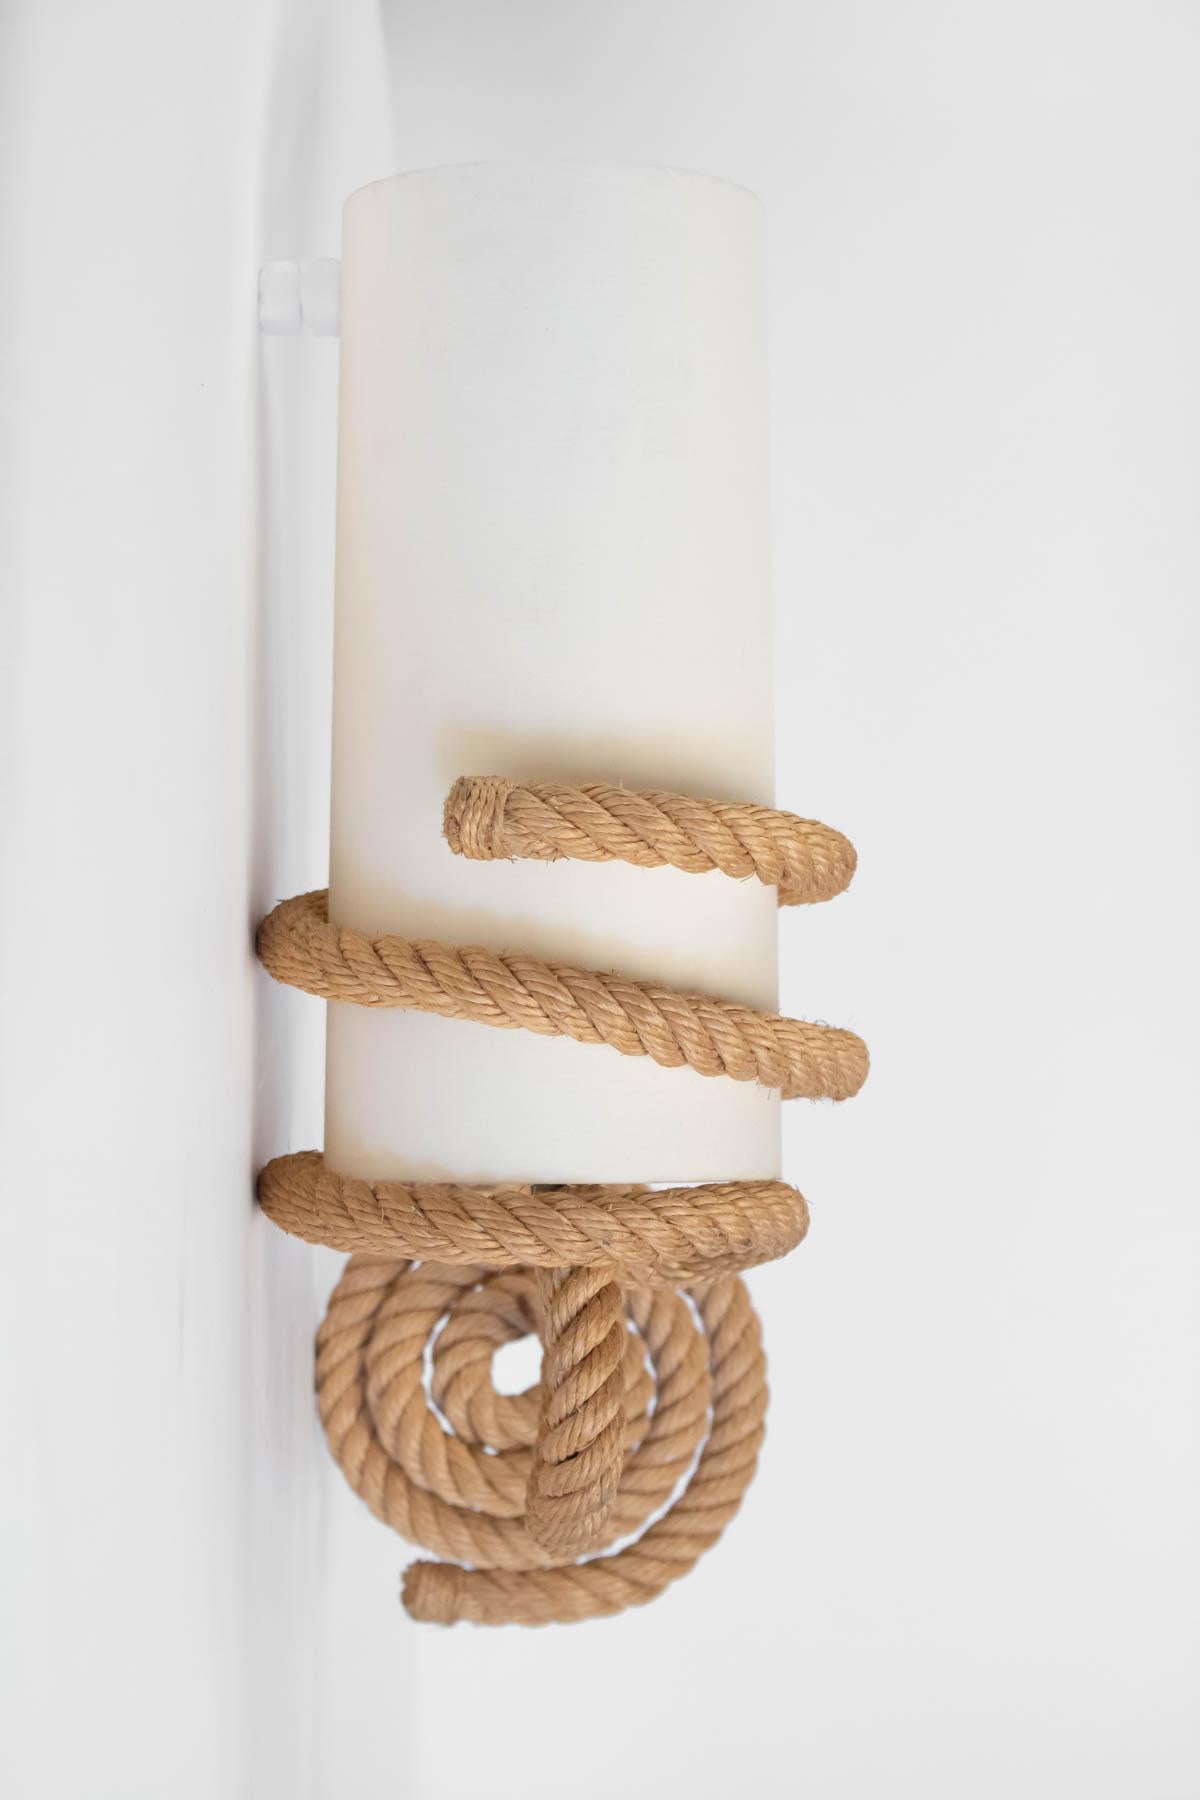 The sconces are made of weaved rope. 
The two cylindrical white cotton shades are hold by a rope spiral.
One bulb per sconce.

Adrien Audoux and Frida Minet are known for their rope lights and furniture. Their first workshop has been founded in